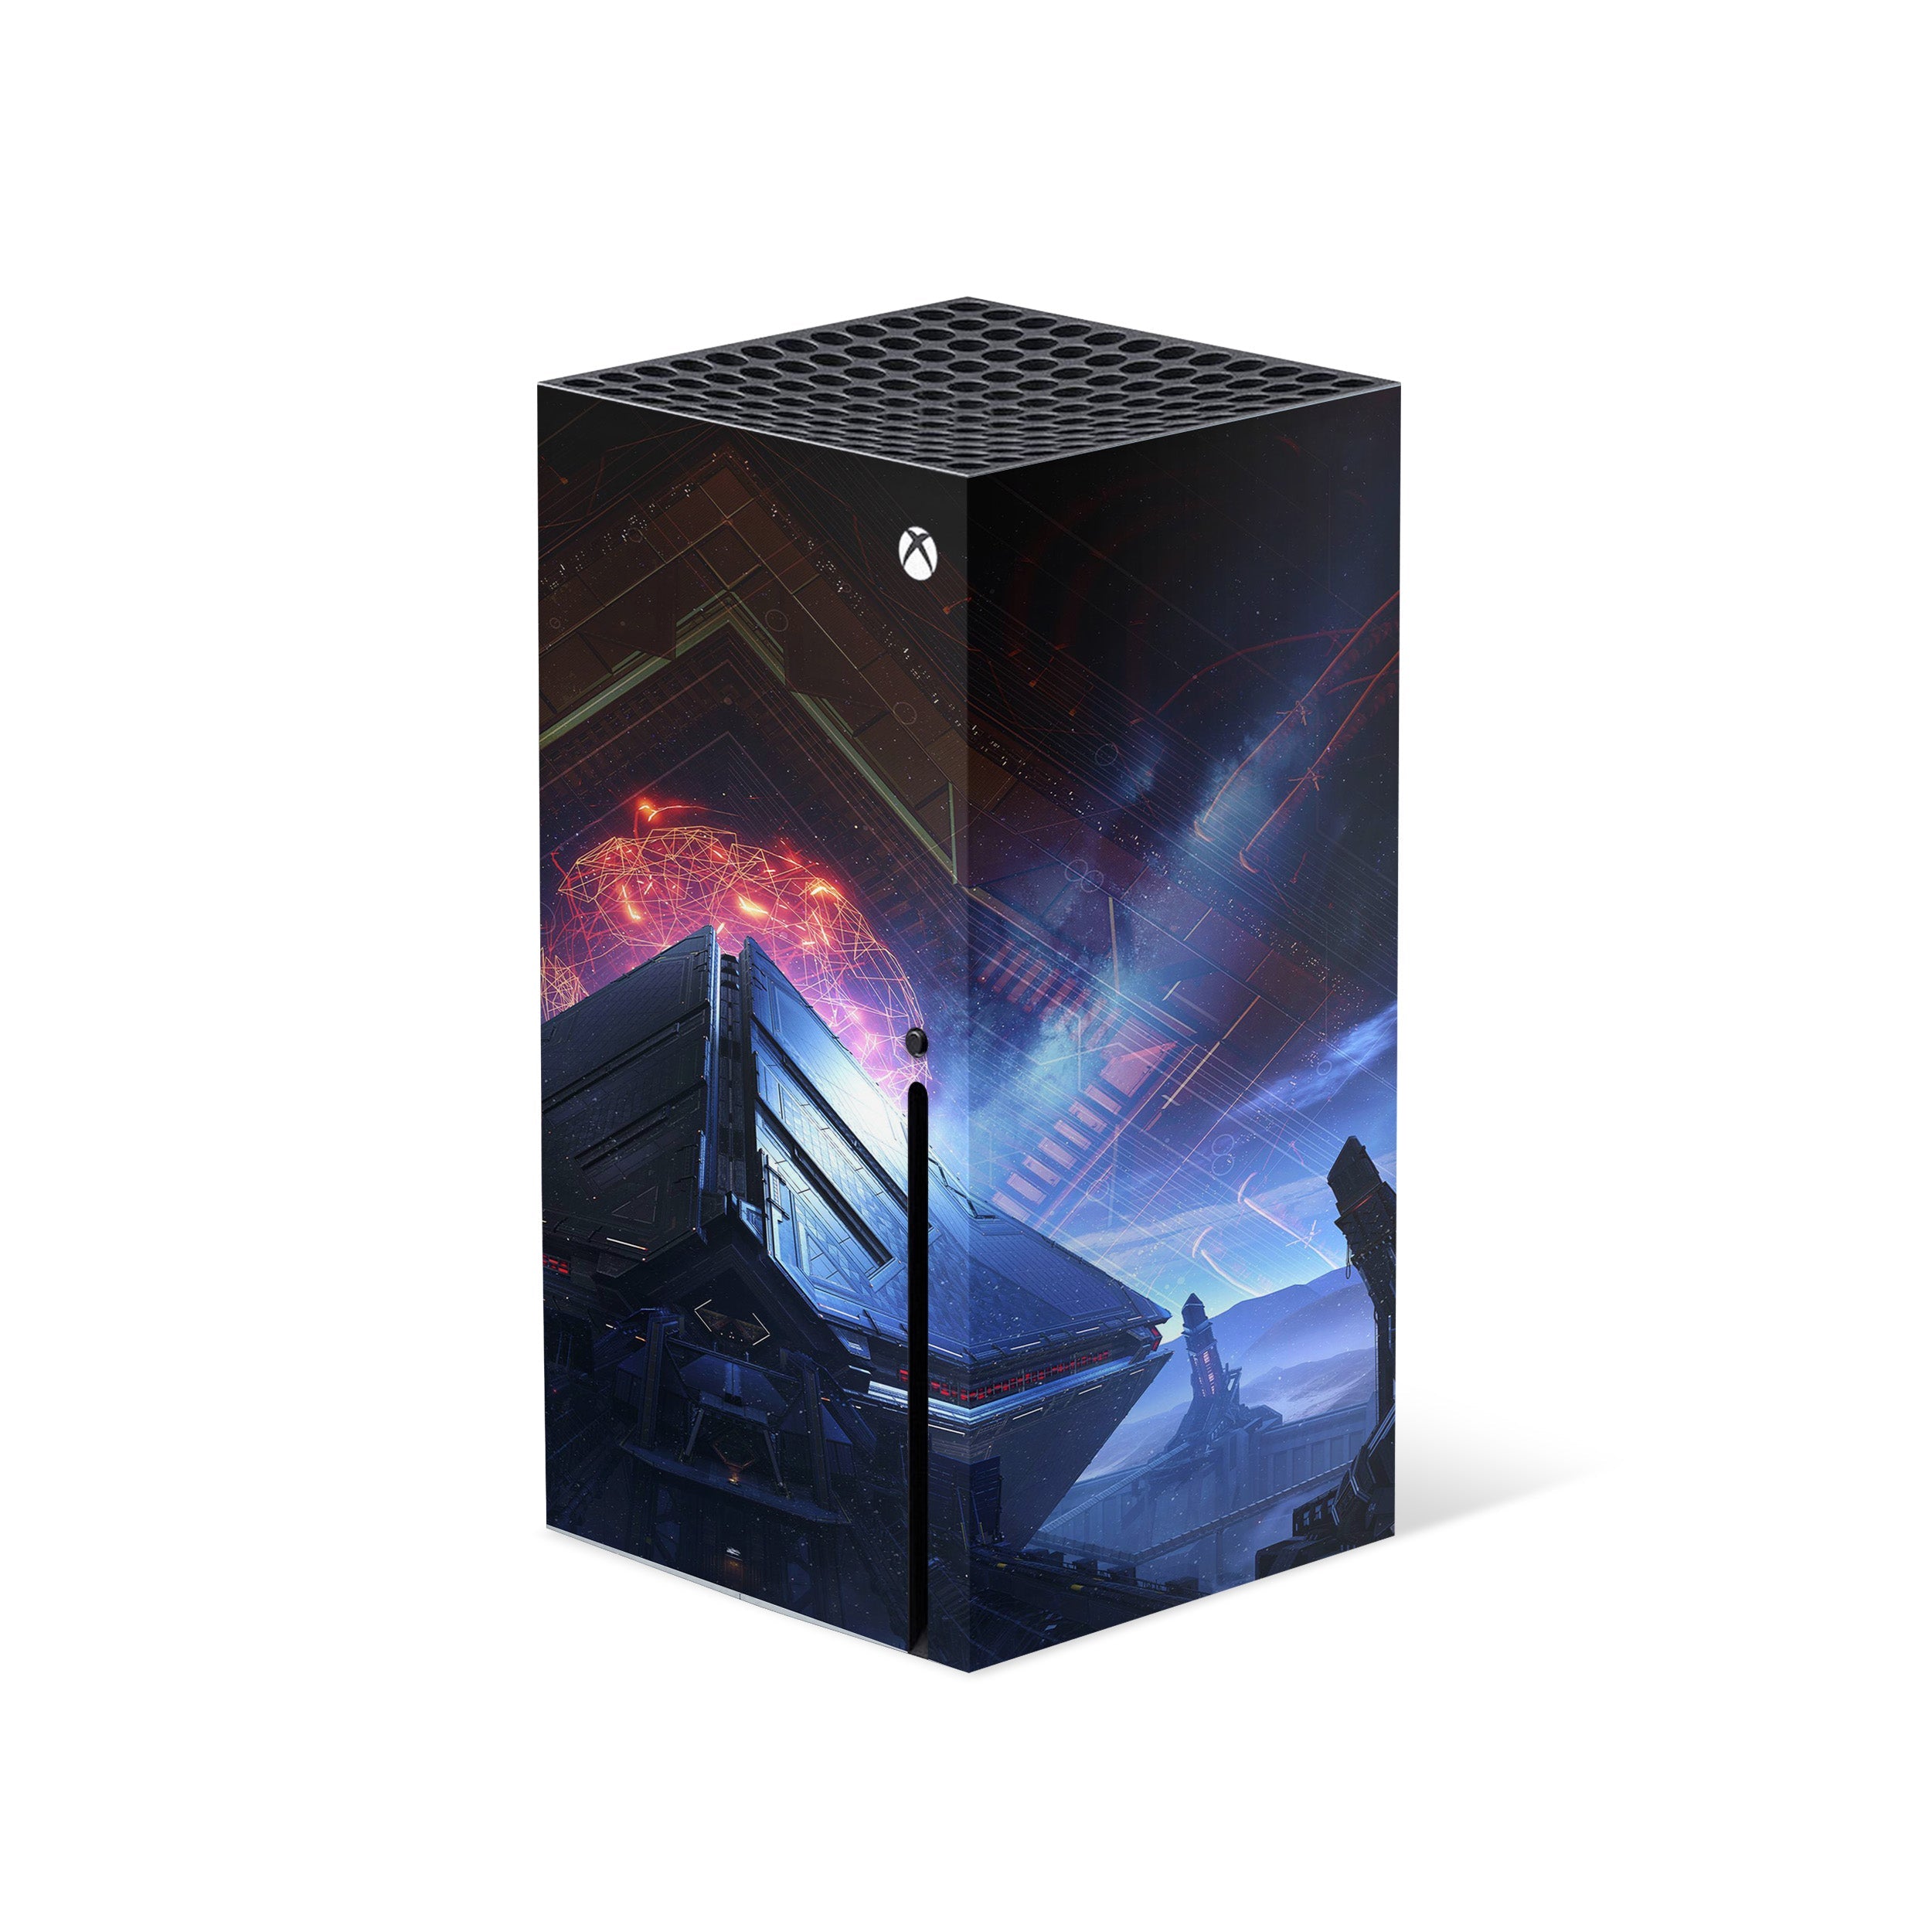 A video game skin featuring a Destiny 2 design for the Xbox Series X.